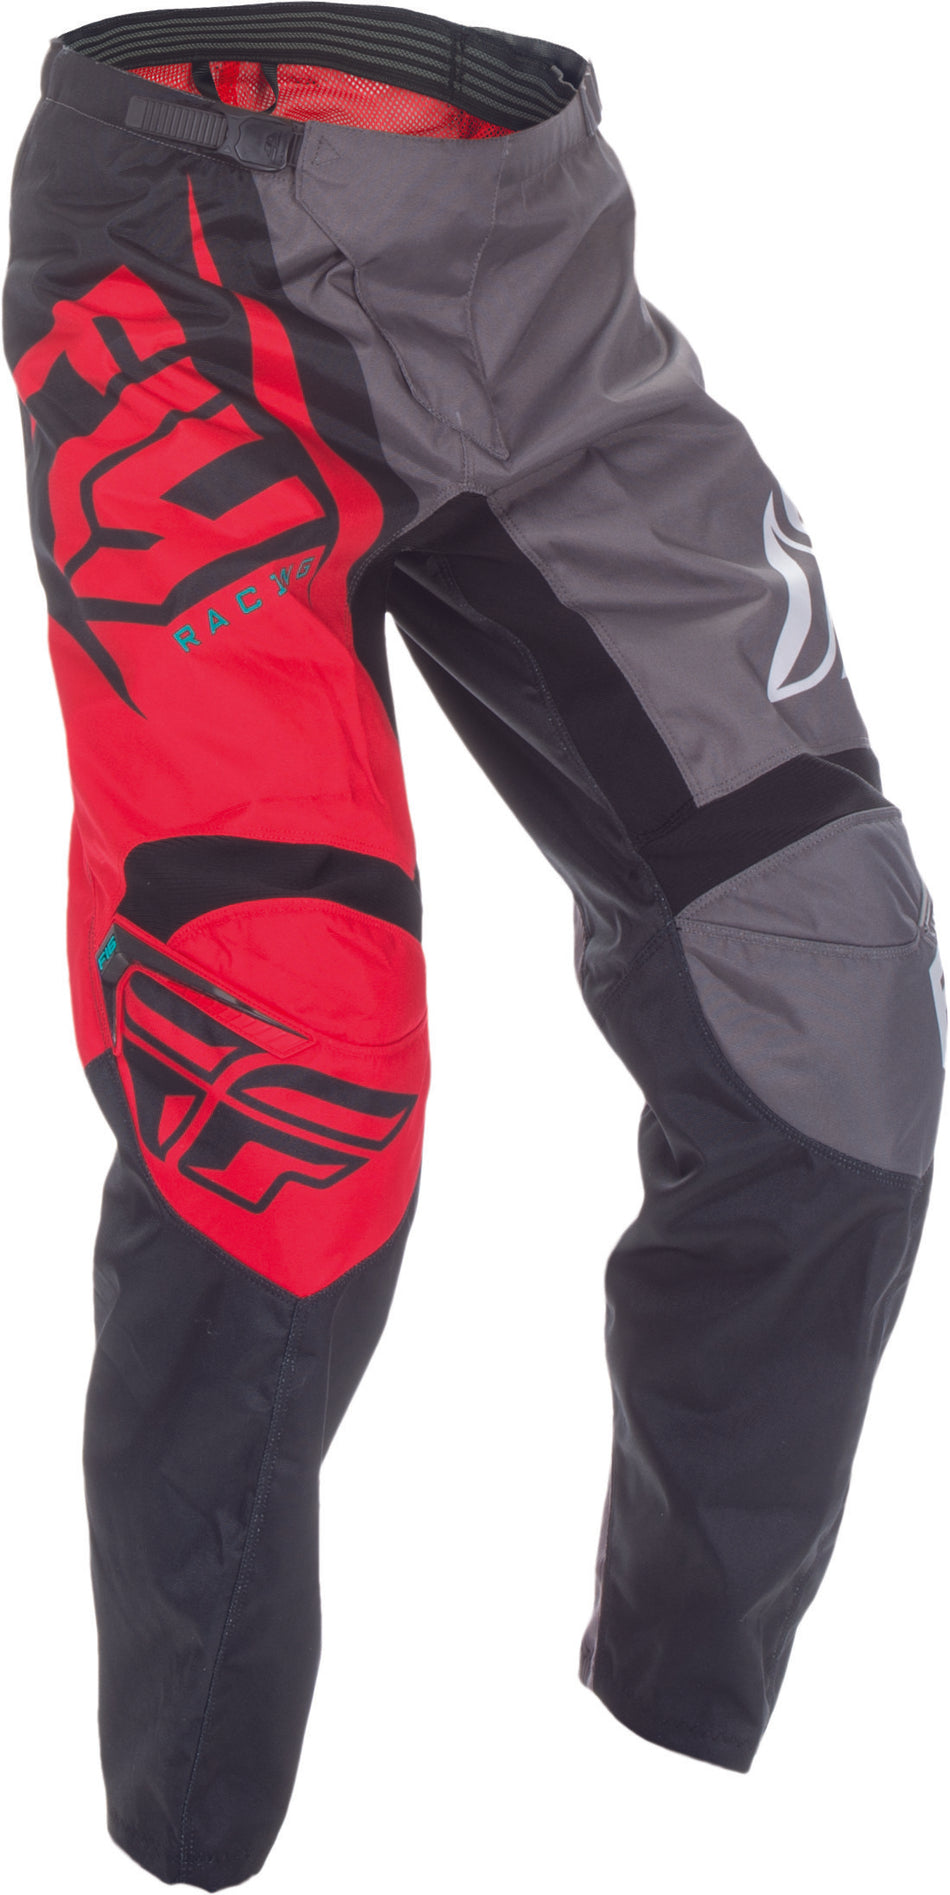 FLY RACING F-16 Pant Red/Black/Grey Sz 36 370-93236